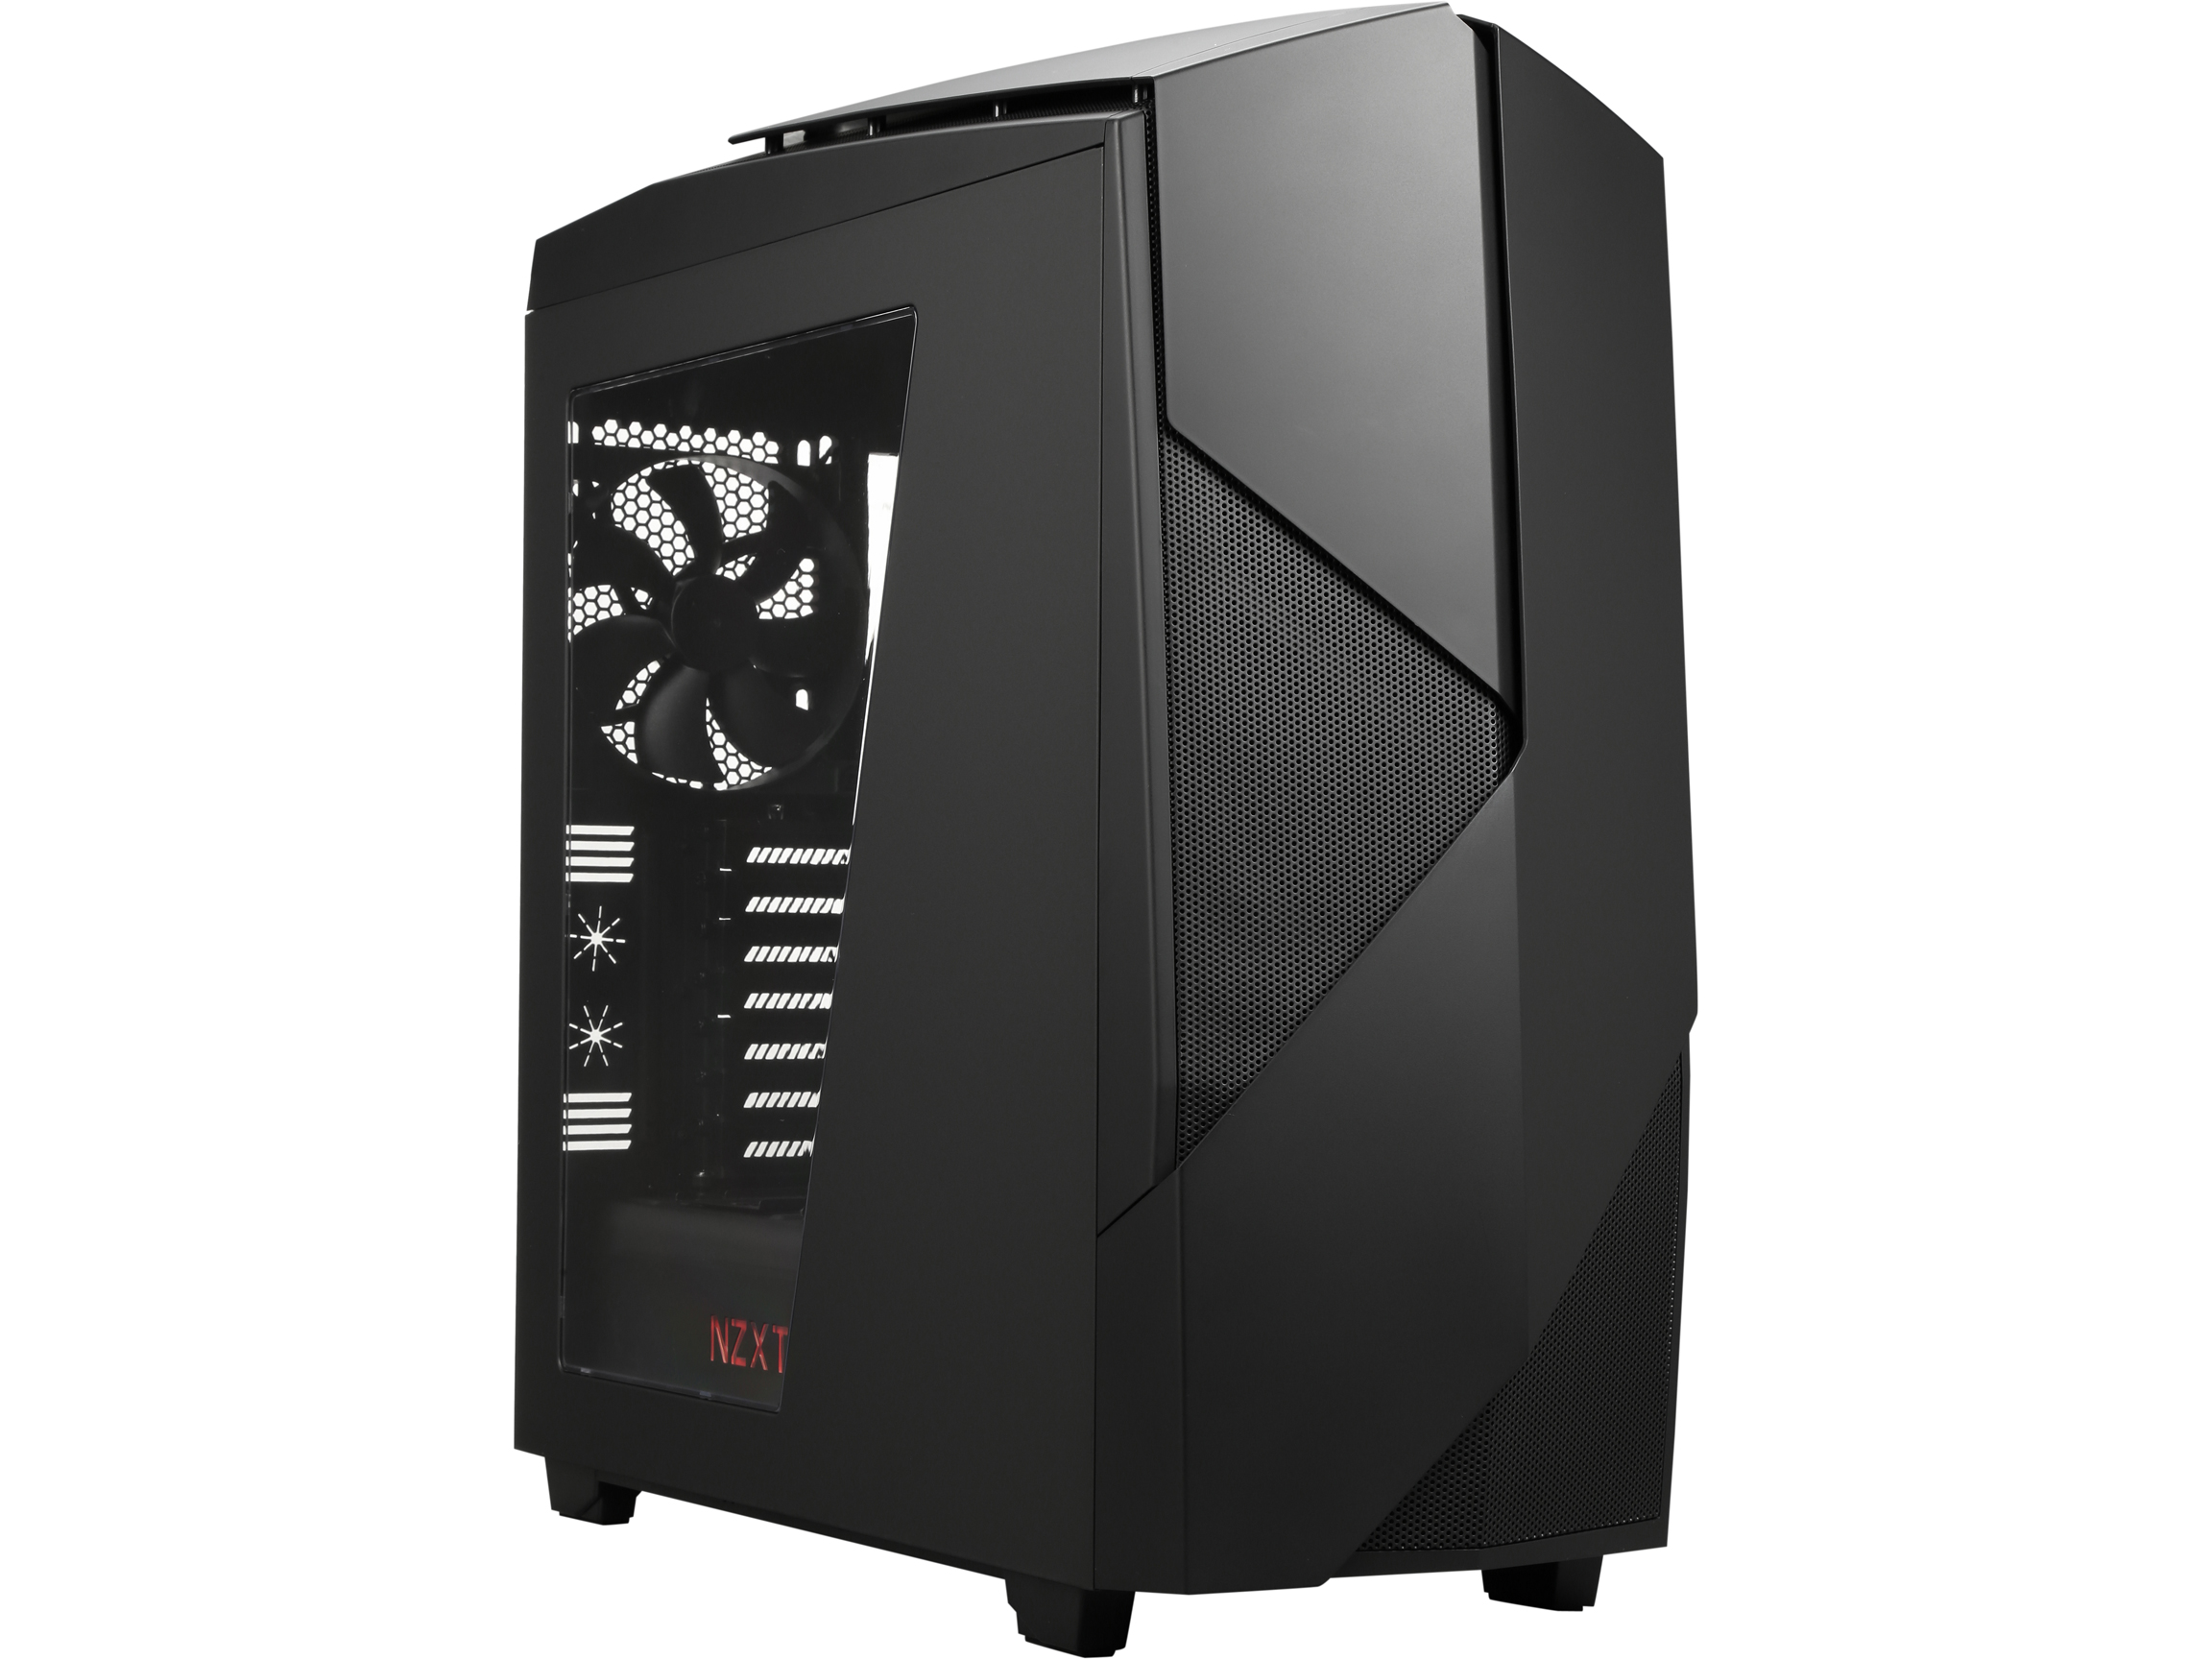 NEW NZXT Noctis 450 Mid Tower Case. Next Generation 5.25 less Design. PWM Fan Hub, Include 4 x 2nd Gen FNv2 Fans, High End WC support, USB3.0, Matte Black/Red LED 